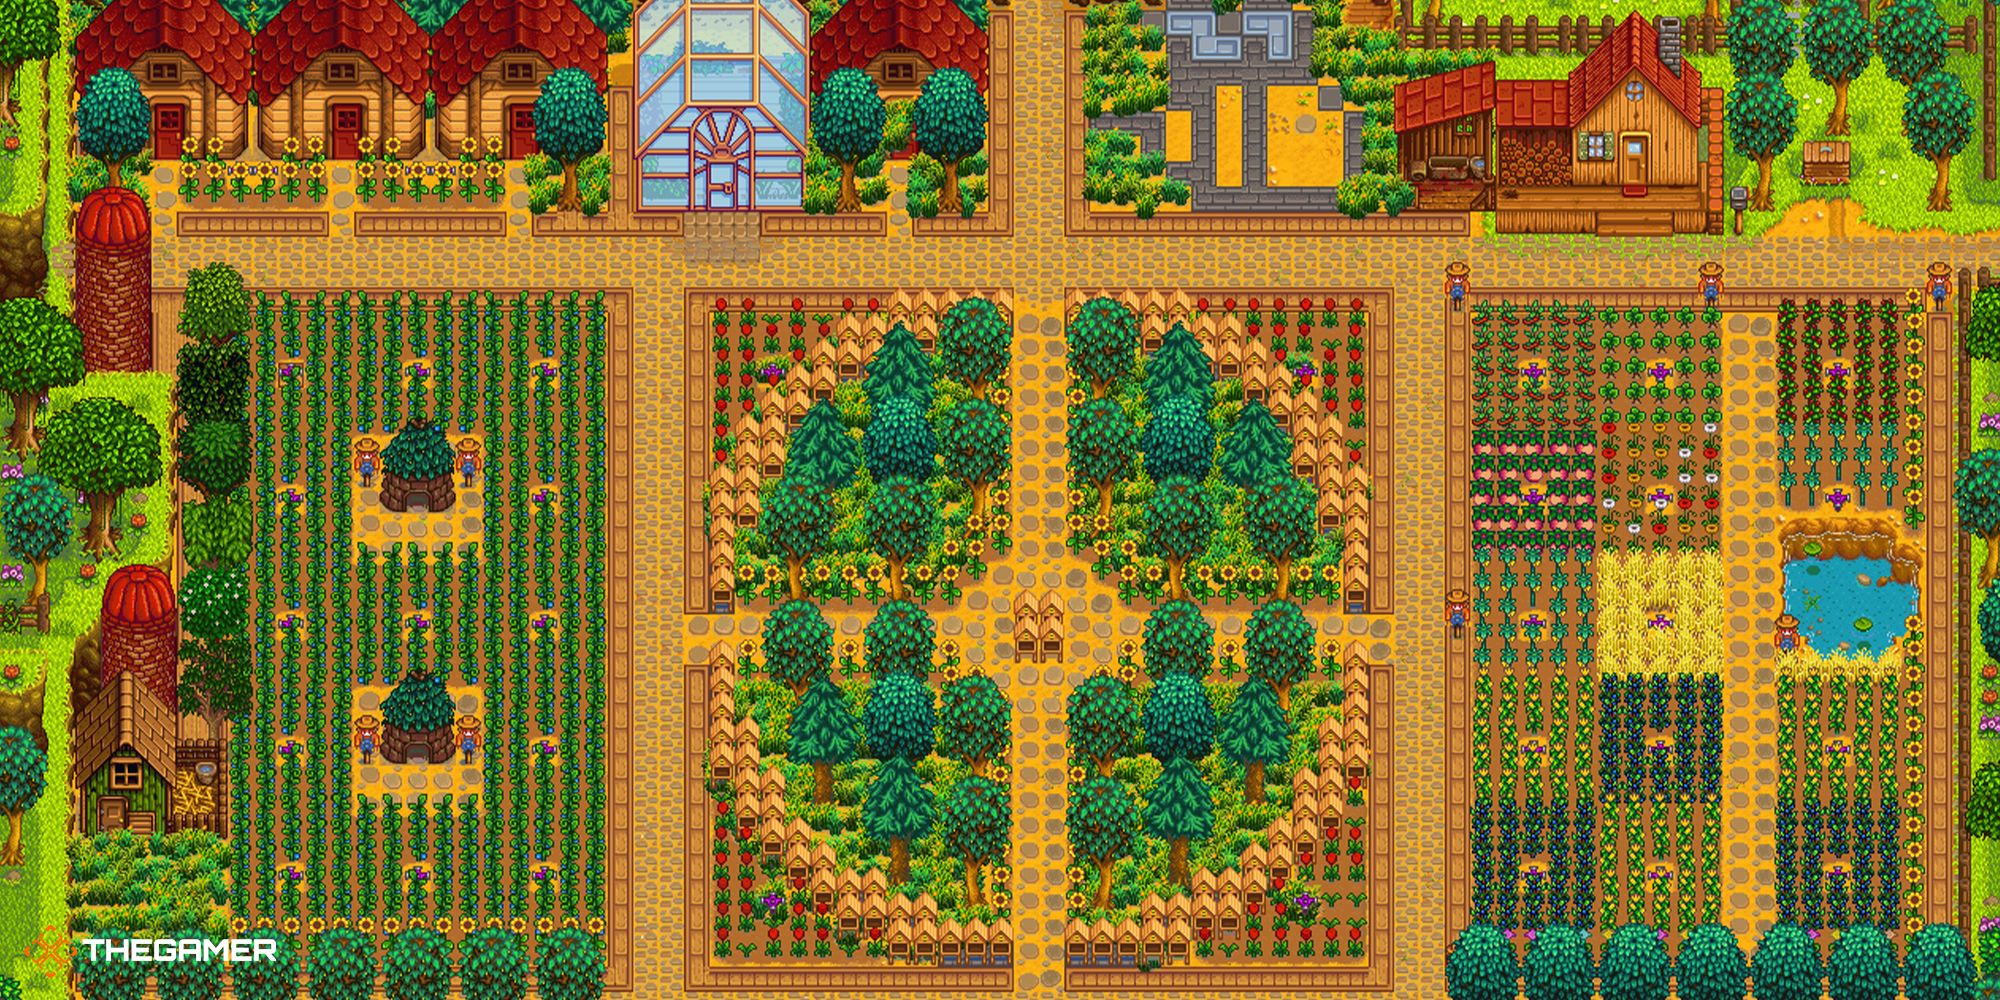 A Standard Farm in Stardew Valley with tons of crops and fruit trees